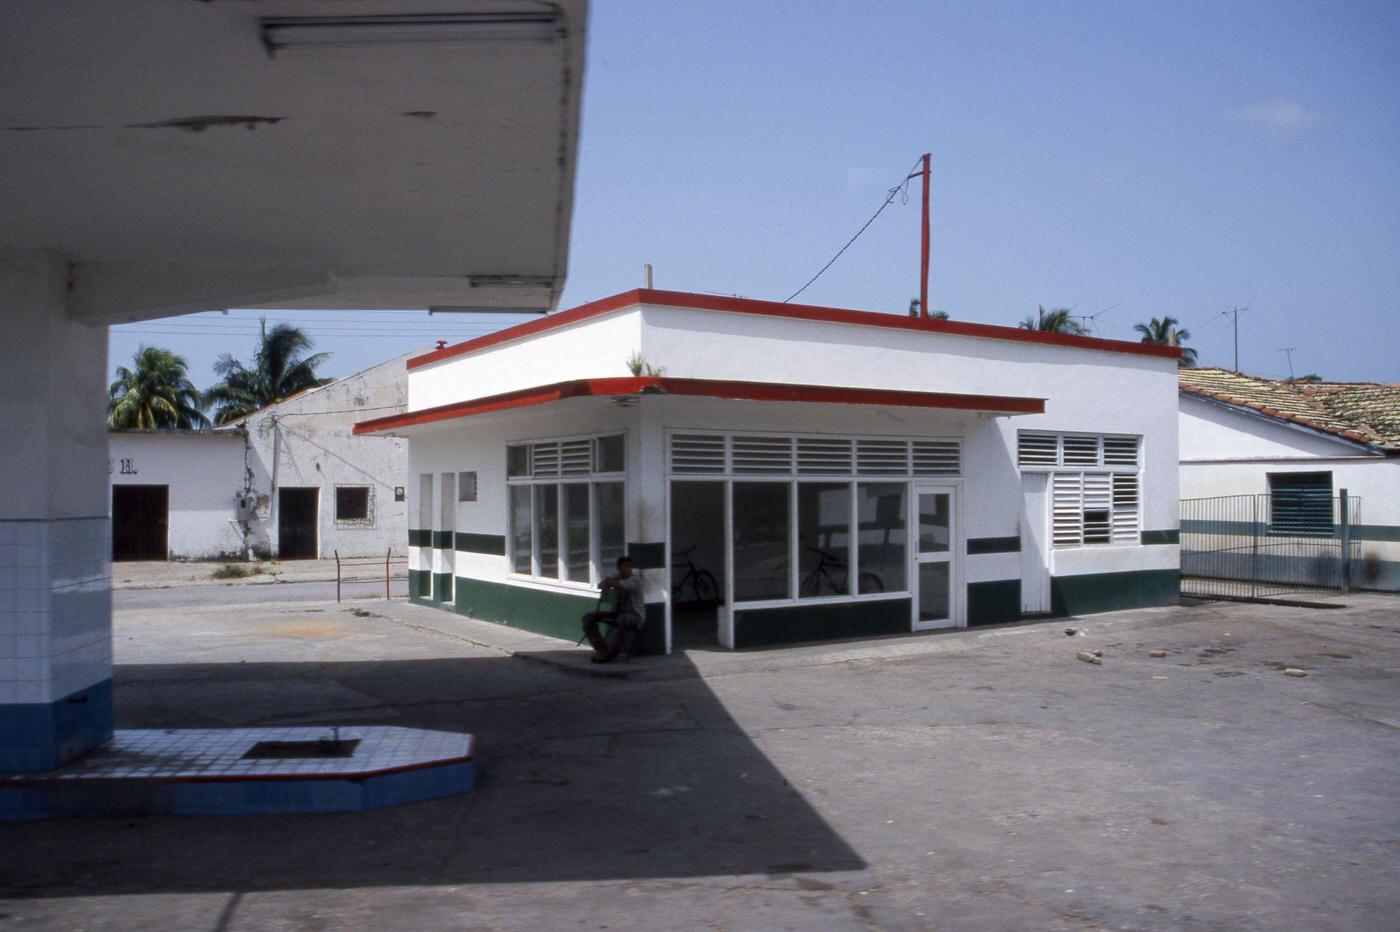 Abandoned gas station and a man in Matanzas, Cuba, June 1999.